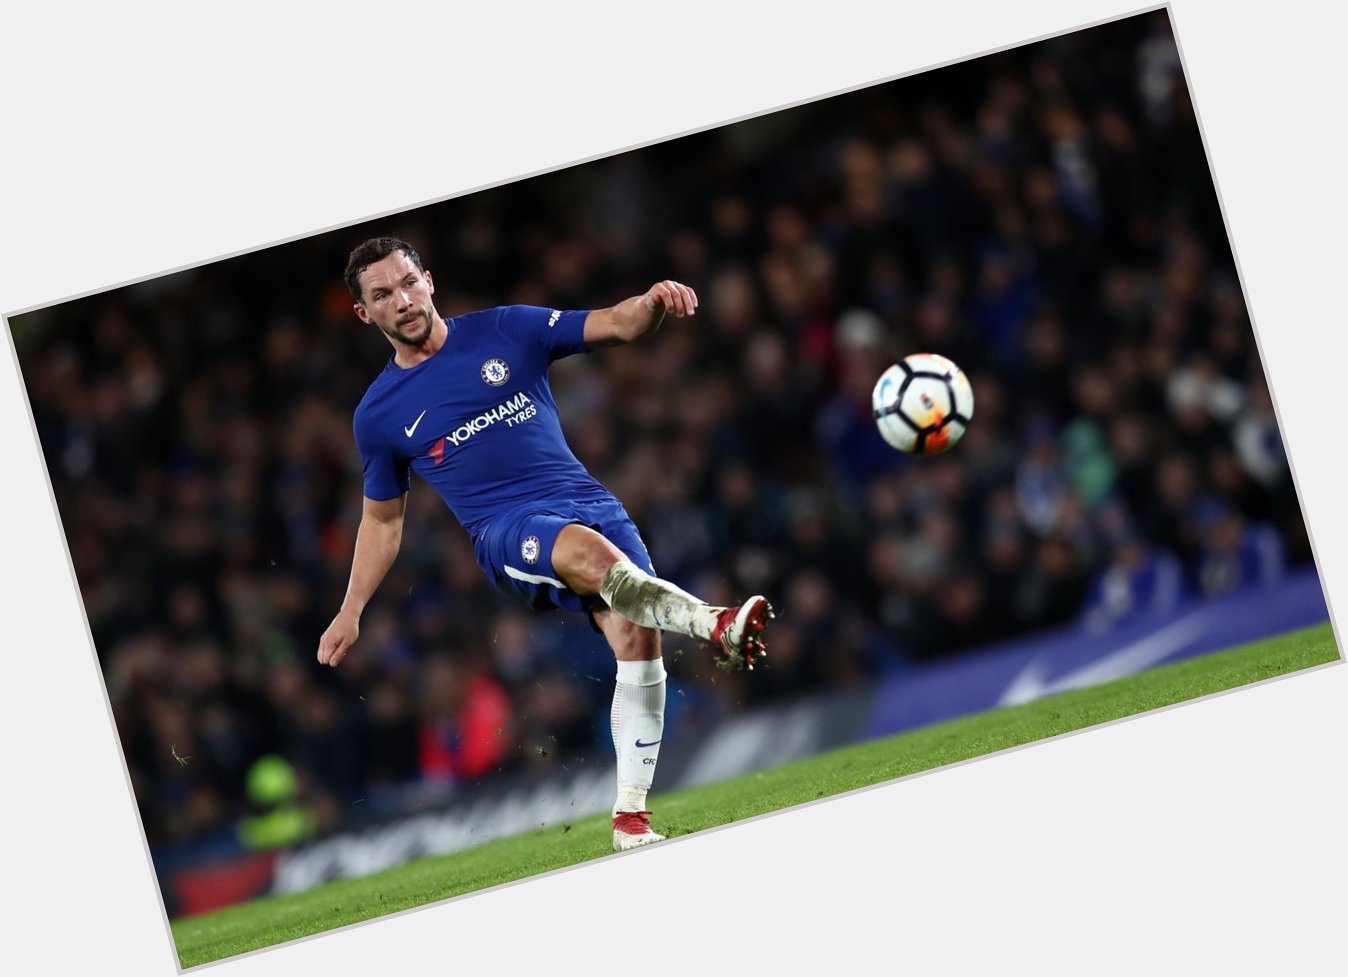 Picture-perfect passes Happy birthday to winner, Danny Drinkwater! 